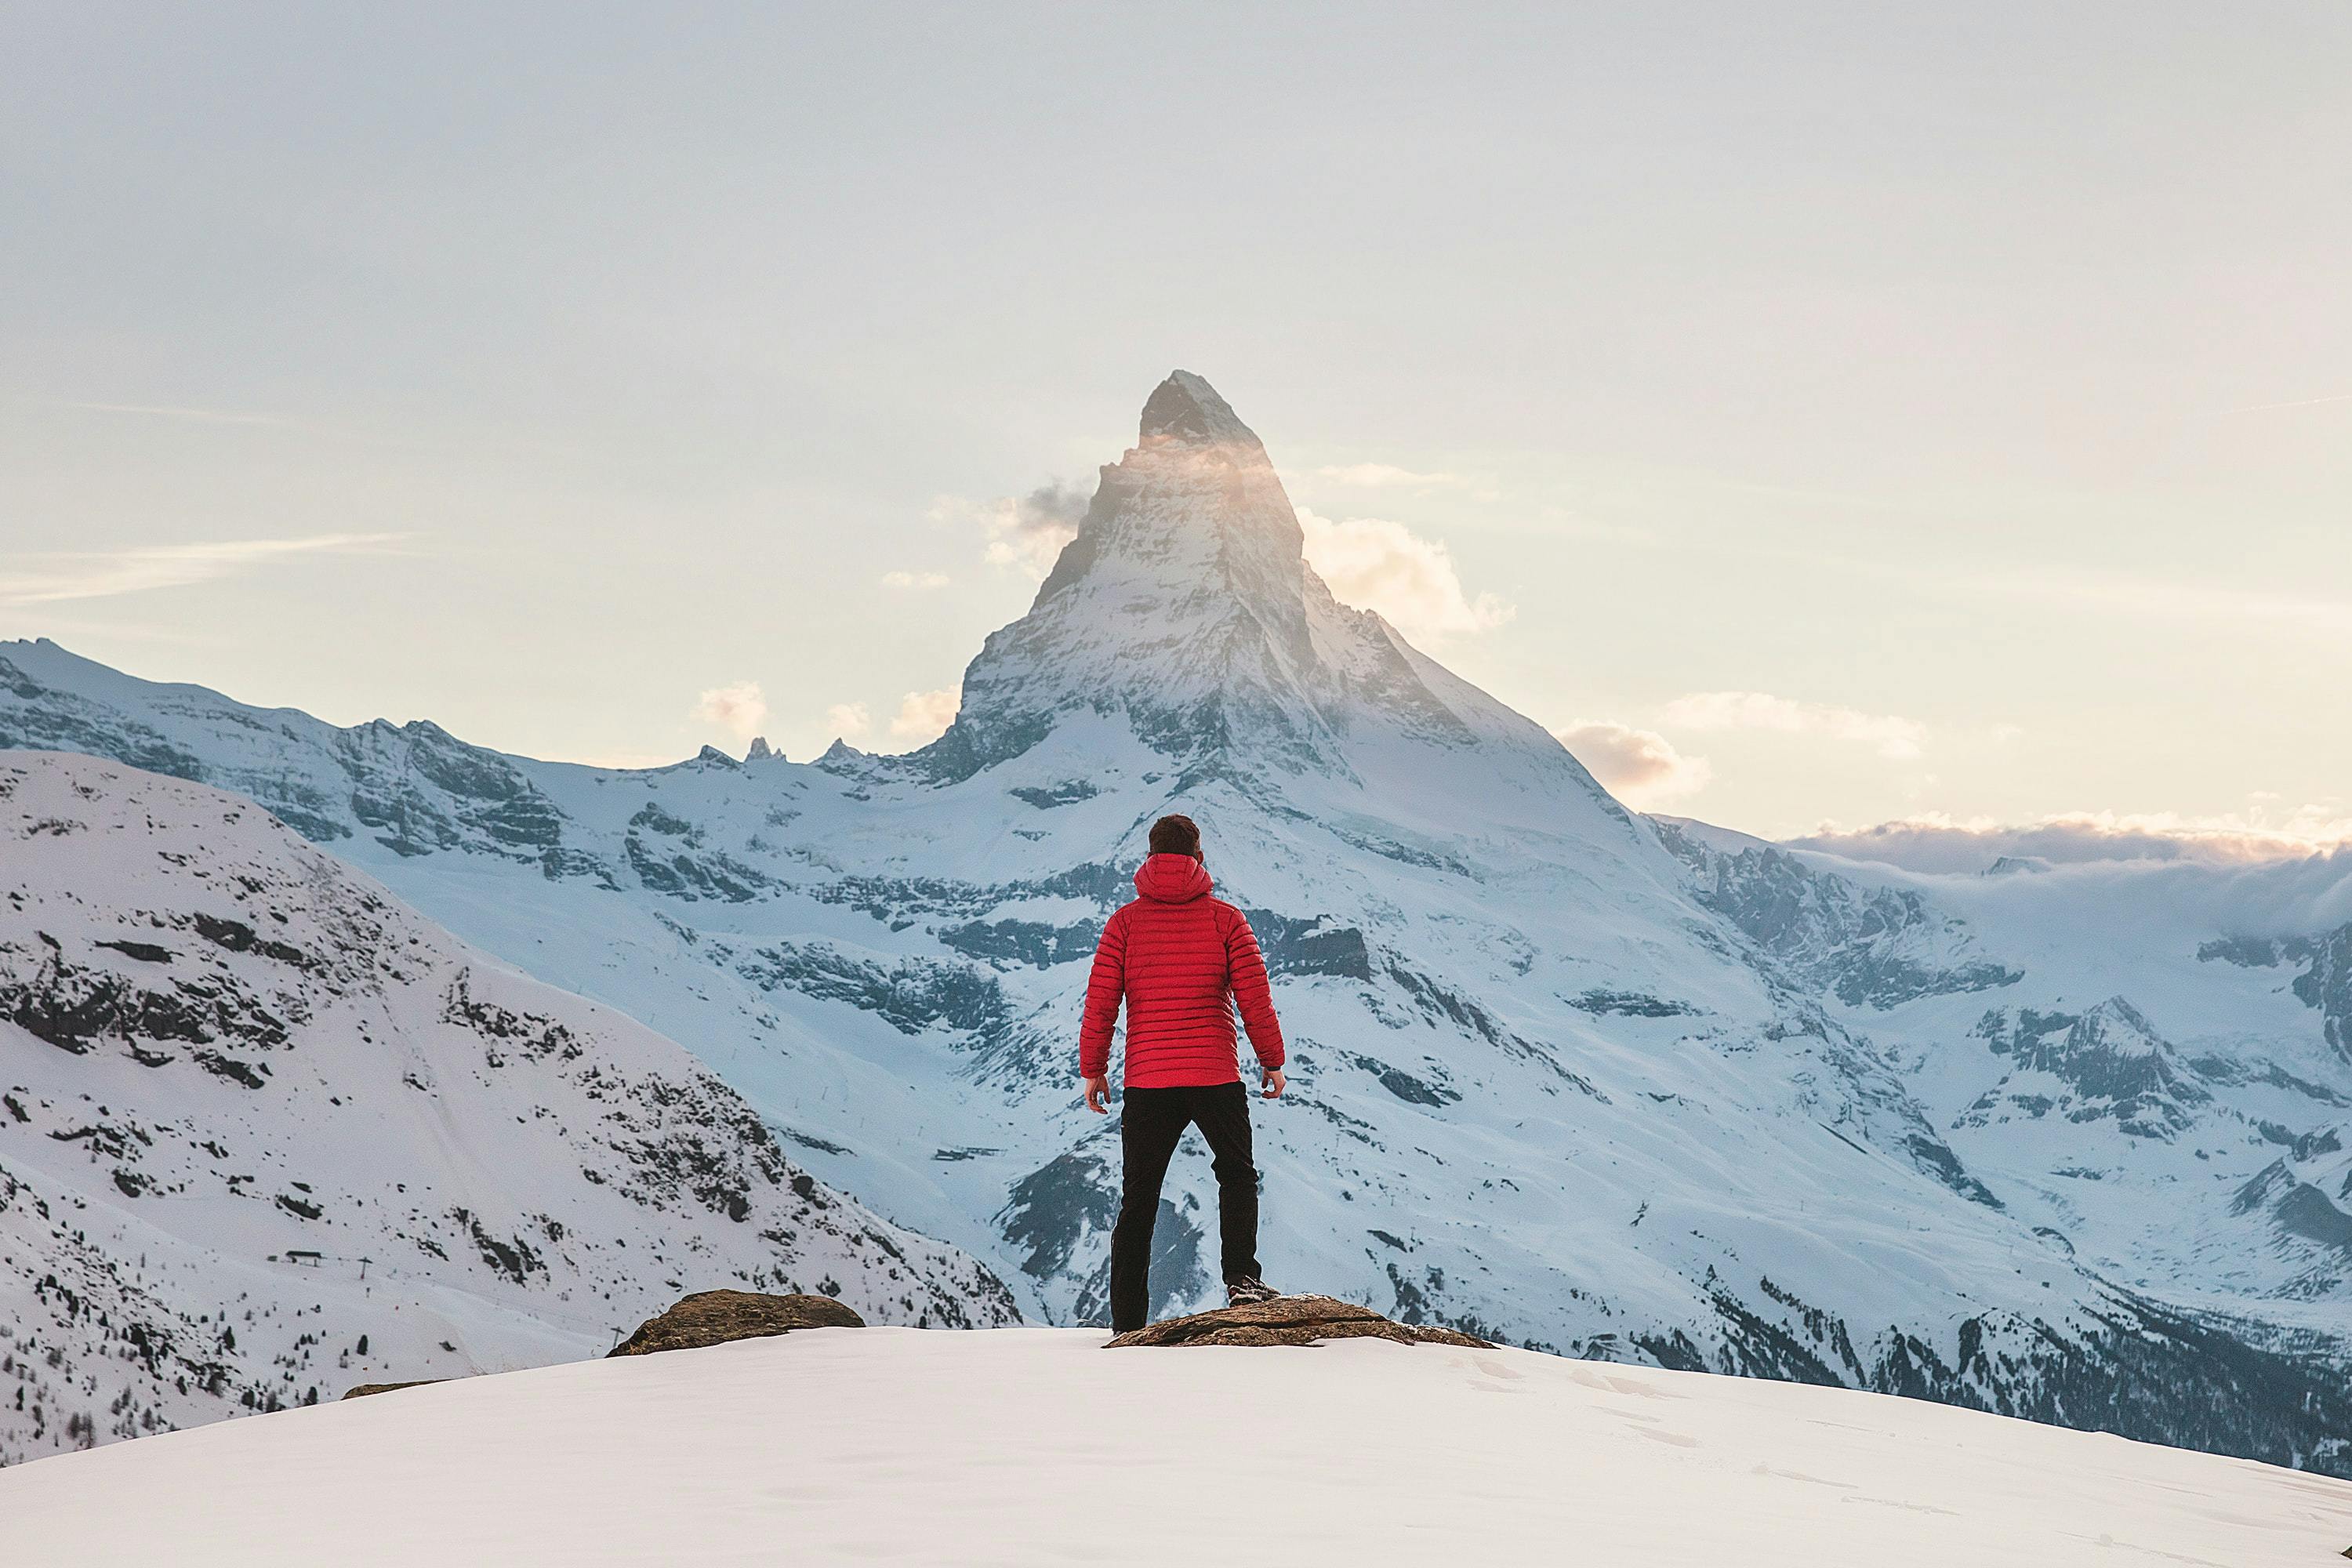 A man in a red jacket and black pants looking out at the snowy mountains before him